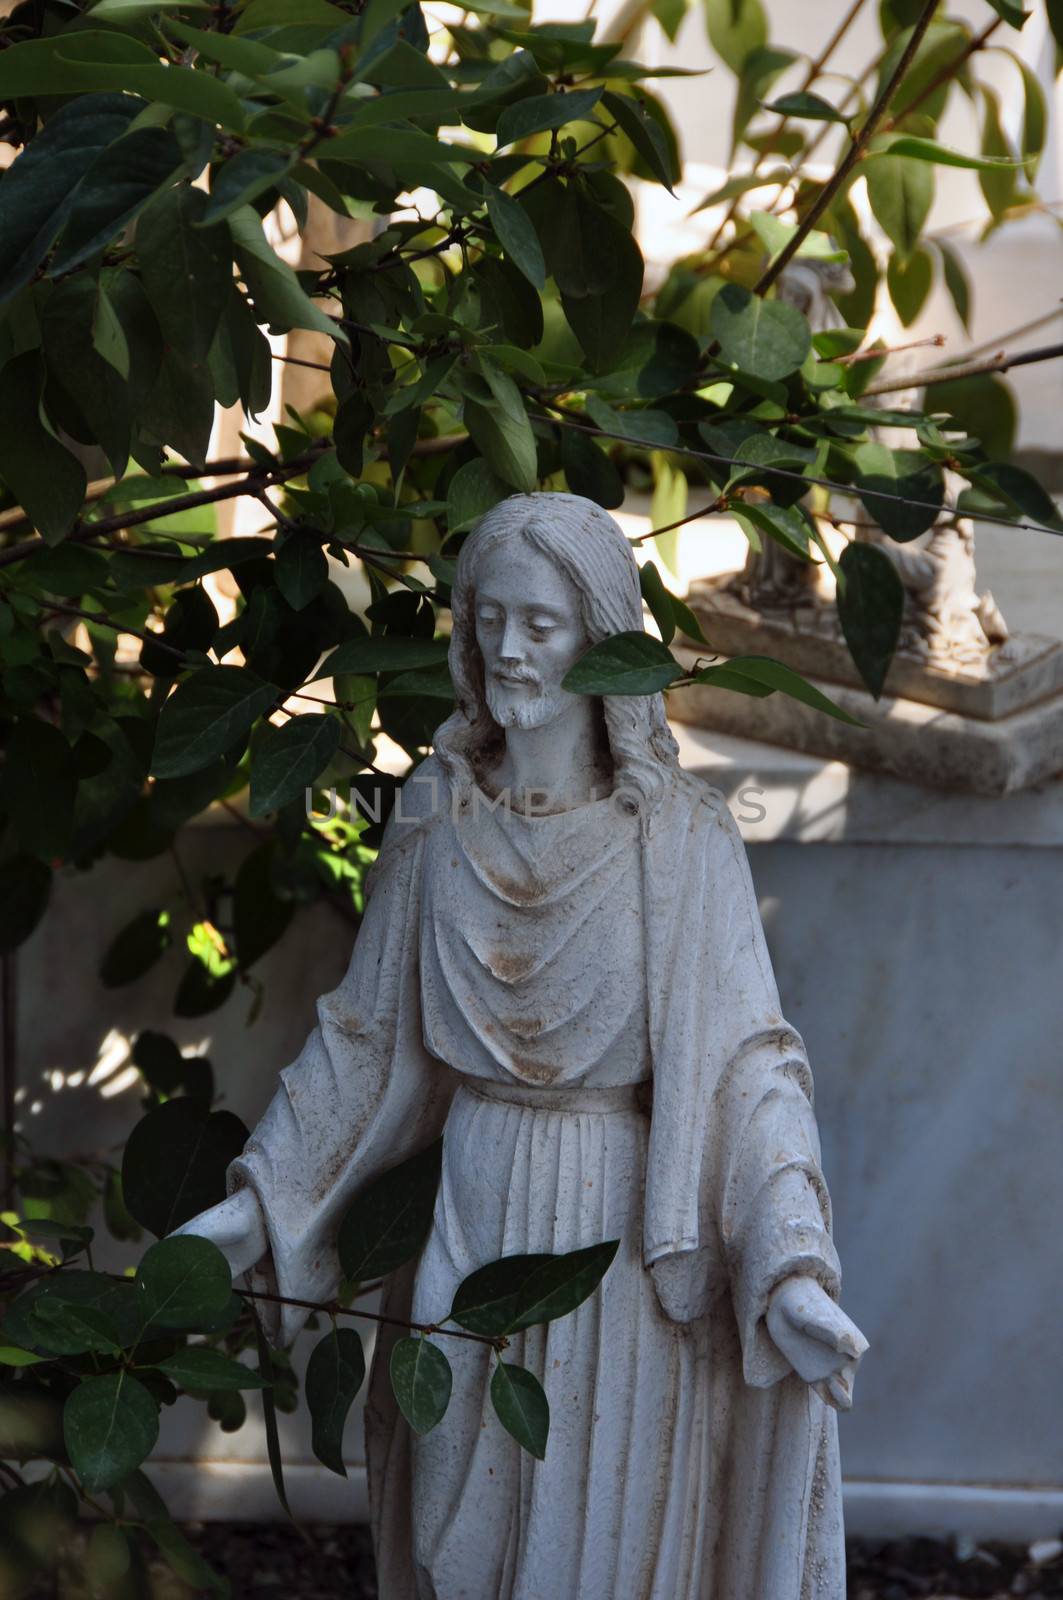 Jesus Christ marble funerary statue among leaves.